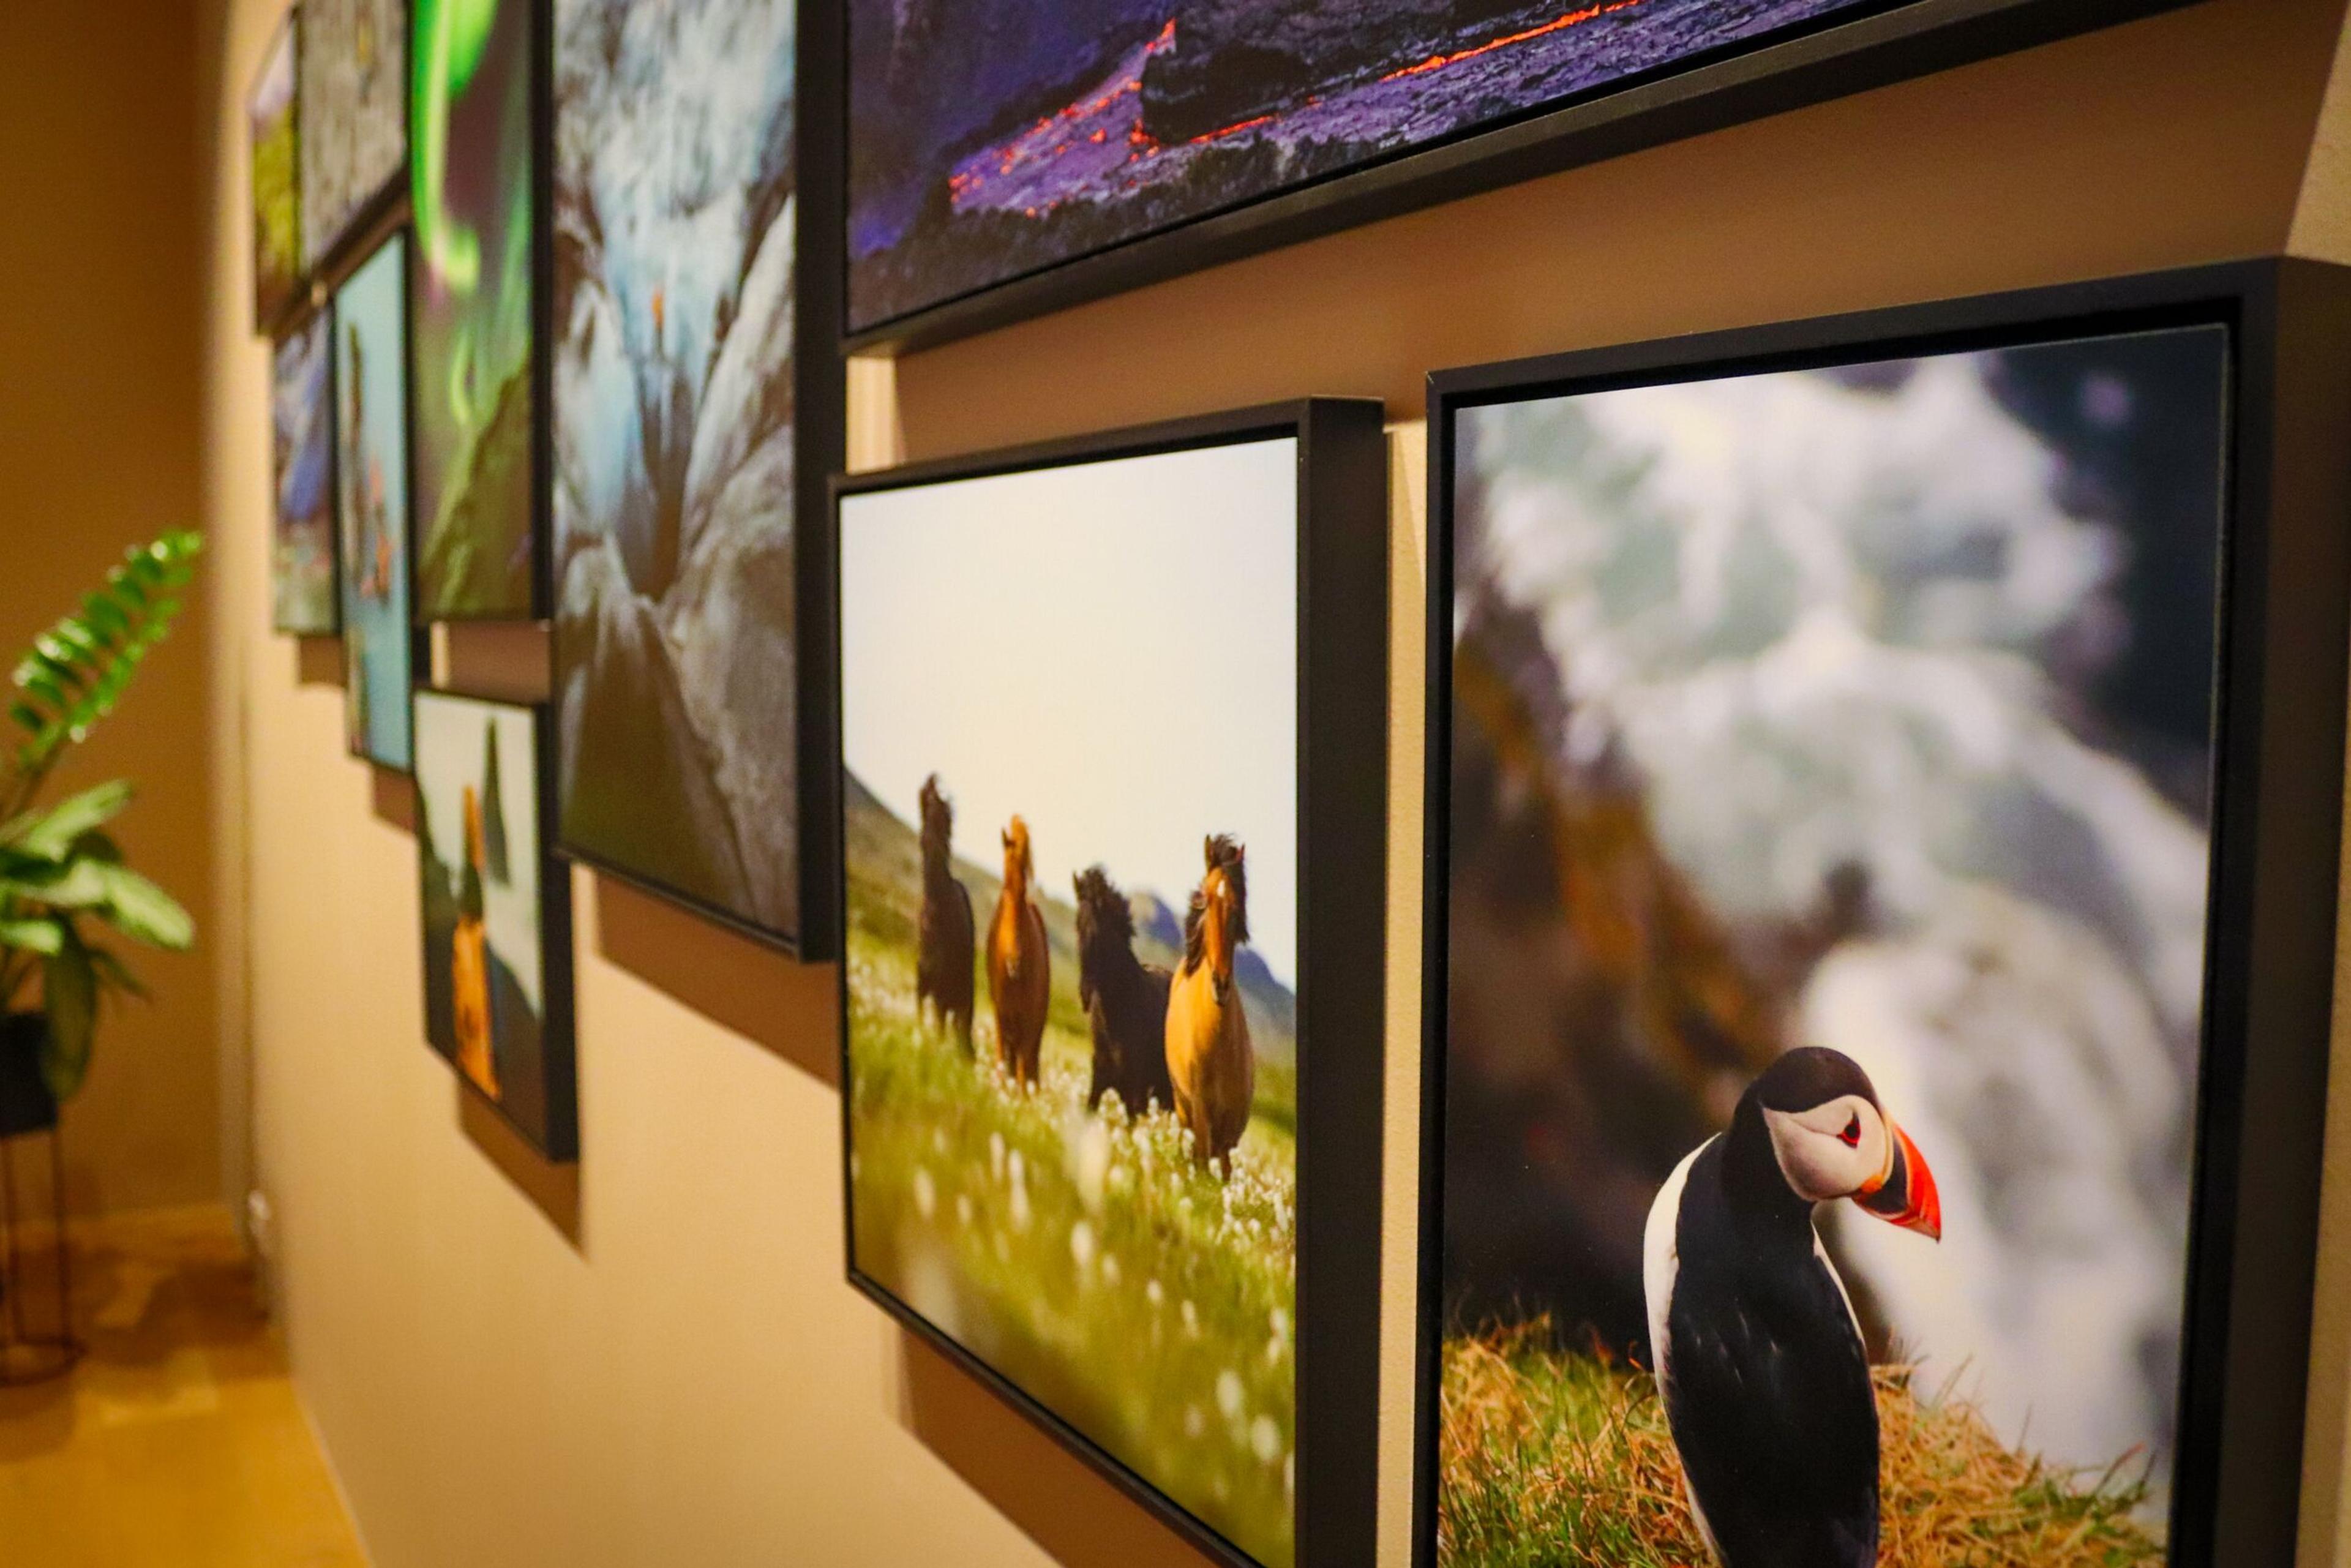 A close-up of a gallery wall with a variety of framed photographs featuring various landscapes, presumably showcasing the natural beauty of Iceland.